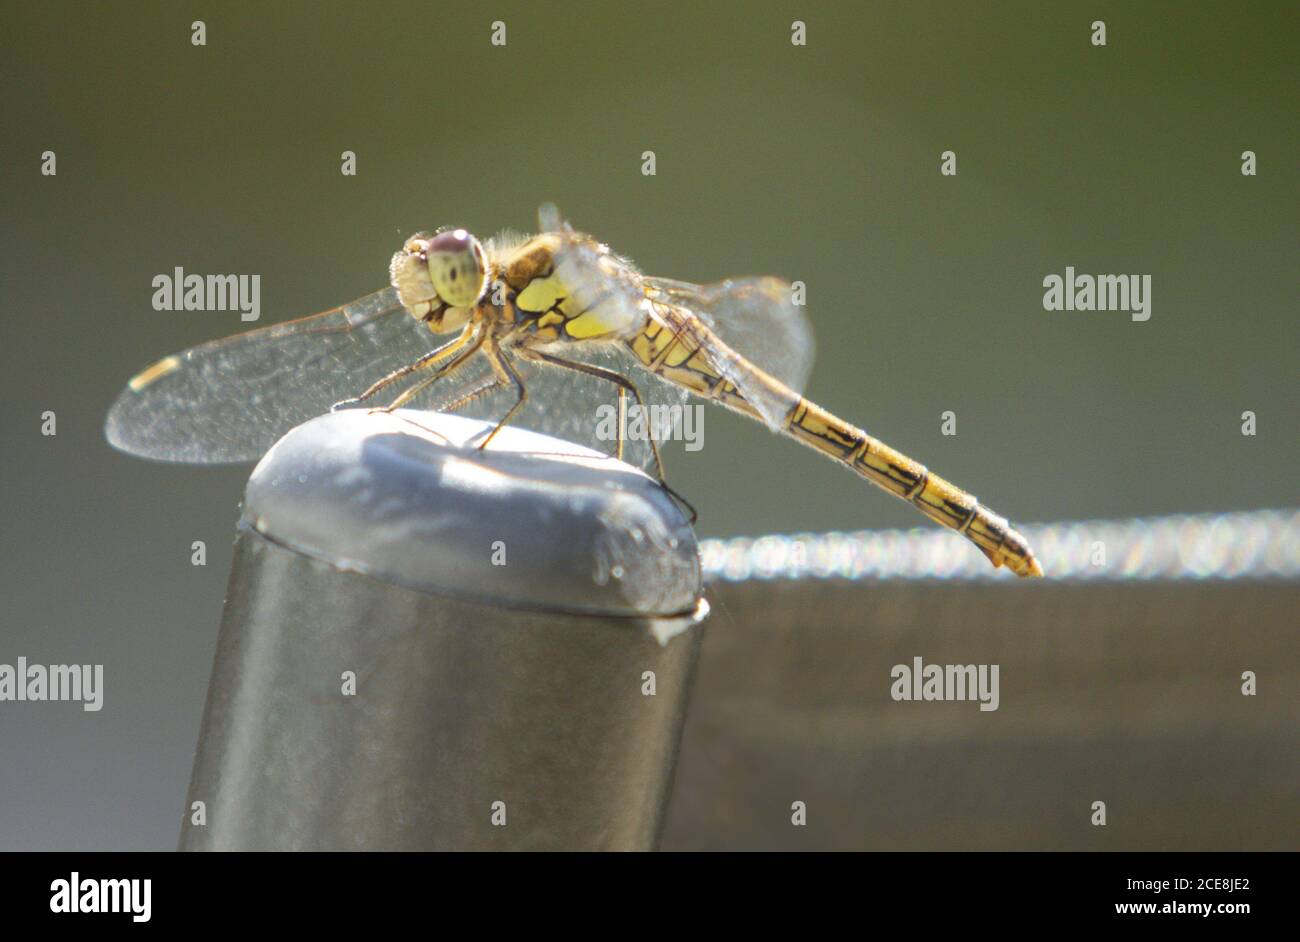 Sidmouth, Devon, 31st August 2020 UK Weather: A dragonfly takes a rest on the back of a garden chair in brilliant sunshine at Sidmouth, Devon on Bank Holiday Monday. The clear skies and full sun are extected to stay throughout the day in the South West. Credit: Photo Central/Alamy Live News Stock Photo